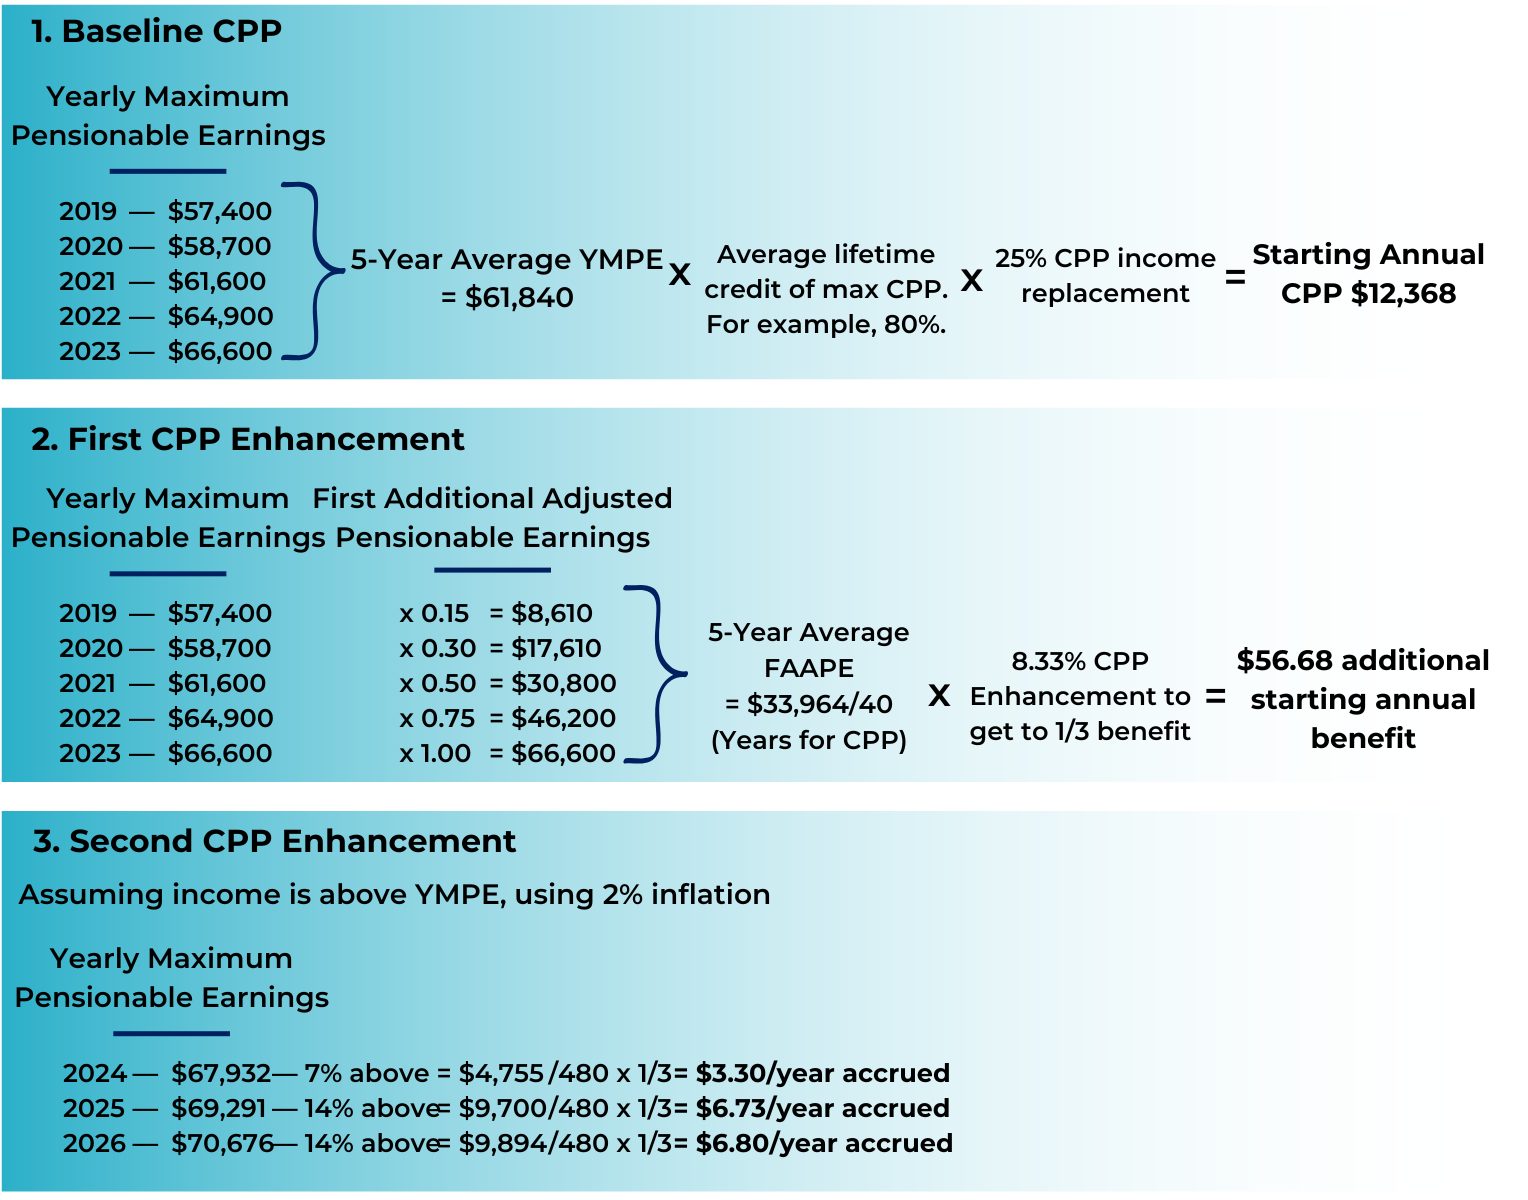 The calculations that a investment counsellor would make to determine CPP retirement benefits.